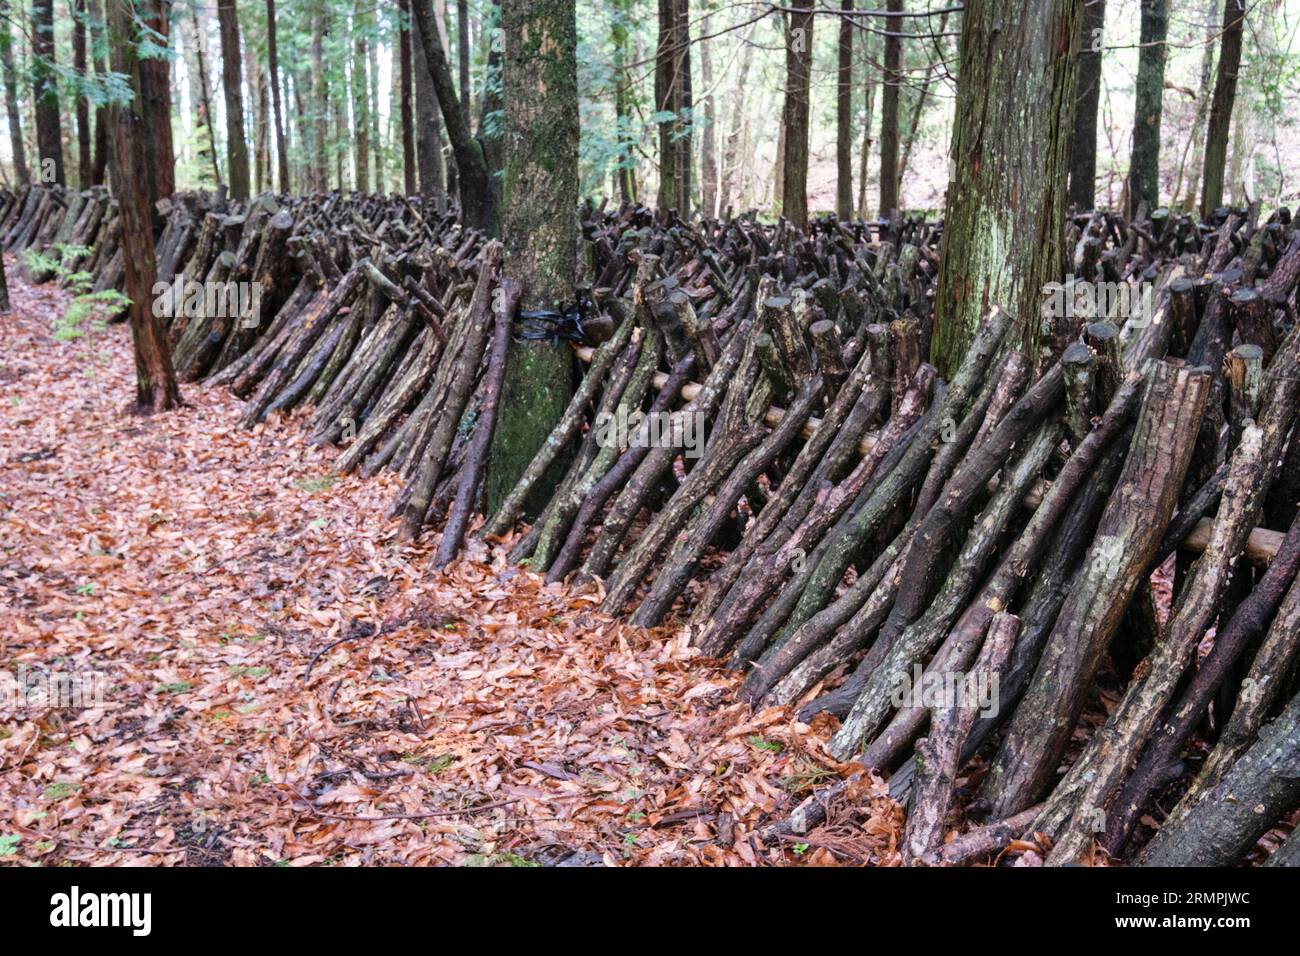 Japan, Kyushu. Shiitake Mushroom Farm in the Forest. Mushroom spores will be implanted on these oak logs. Stock Photo